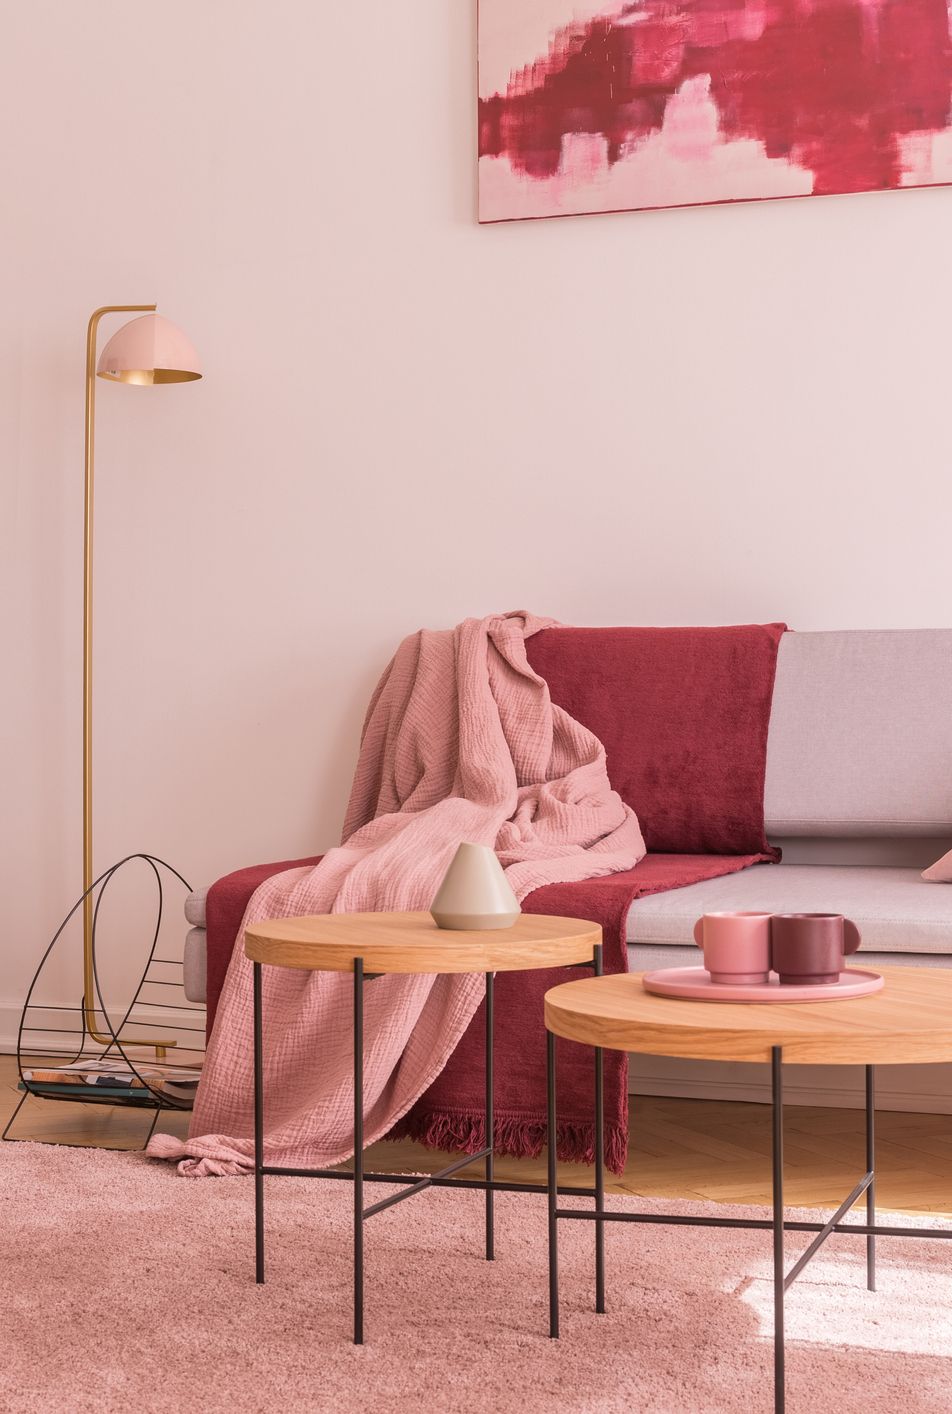 Pink living room ideas – decorating tips for using this on-trend